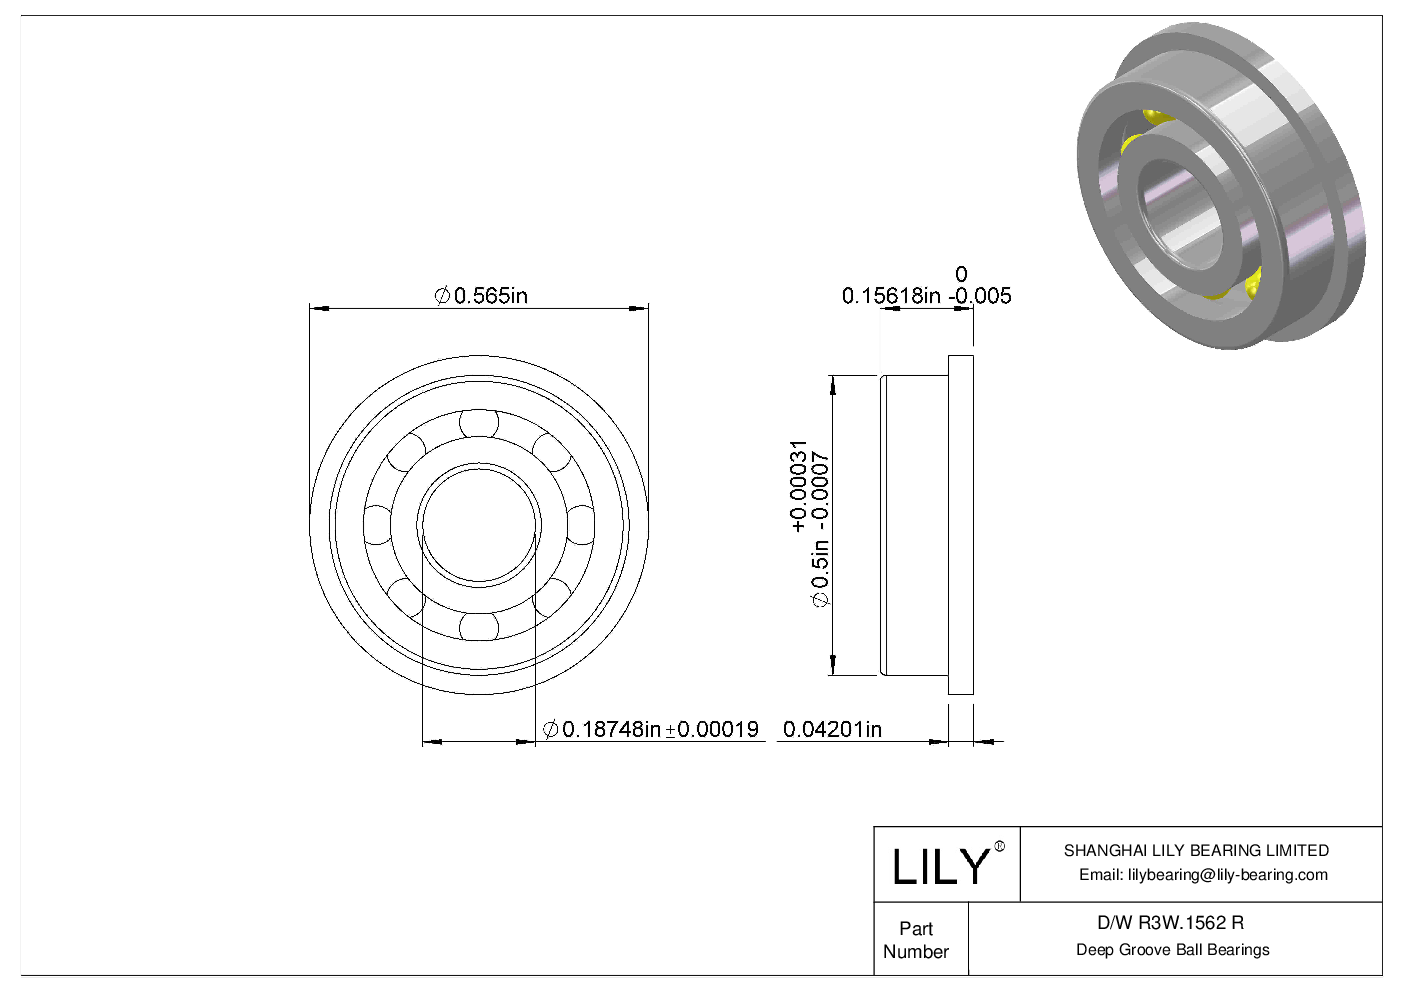 D/W R3W.1562 R Flanged Ball Bearings cad drawing